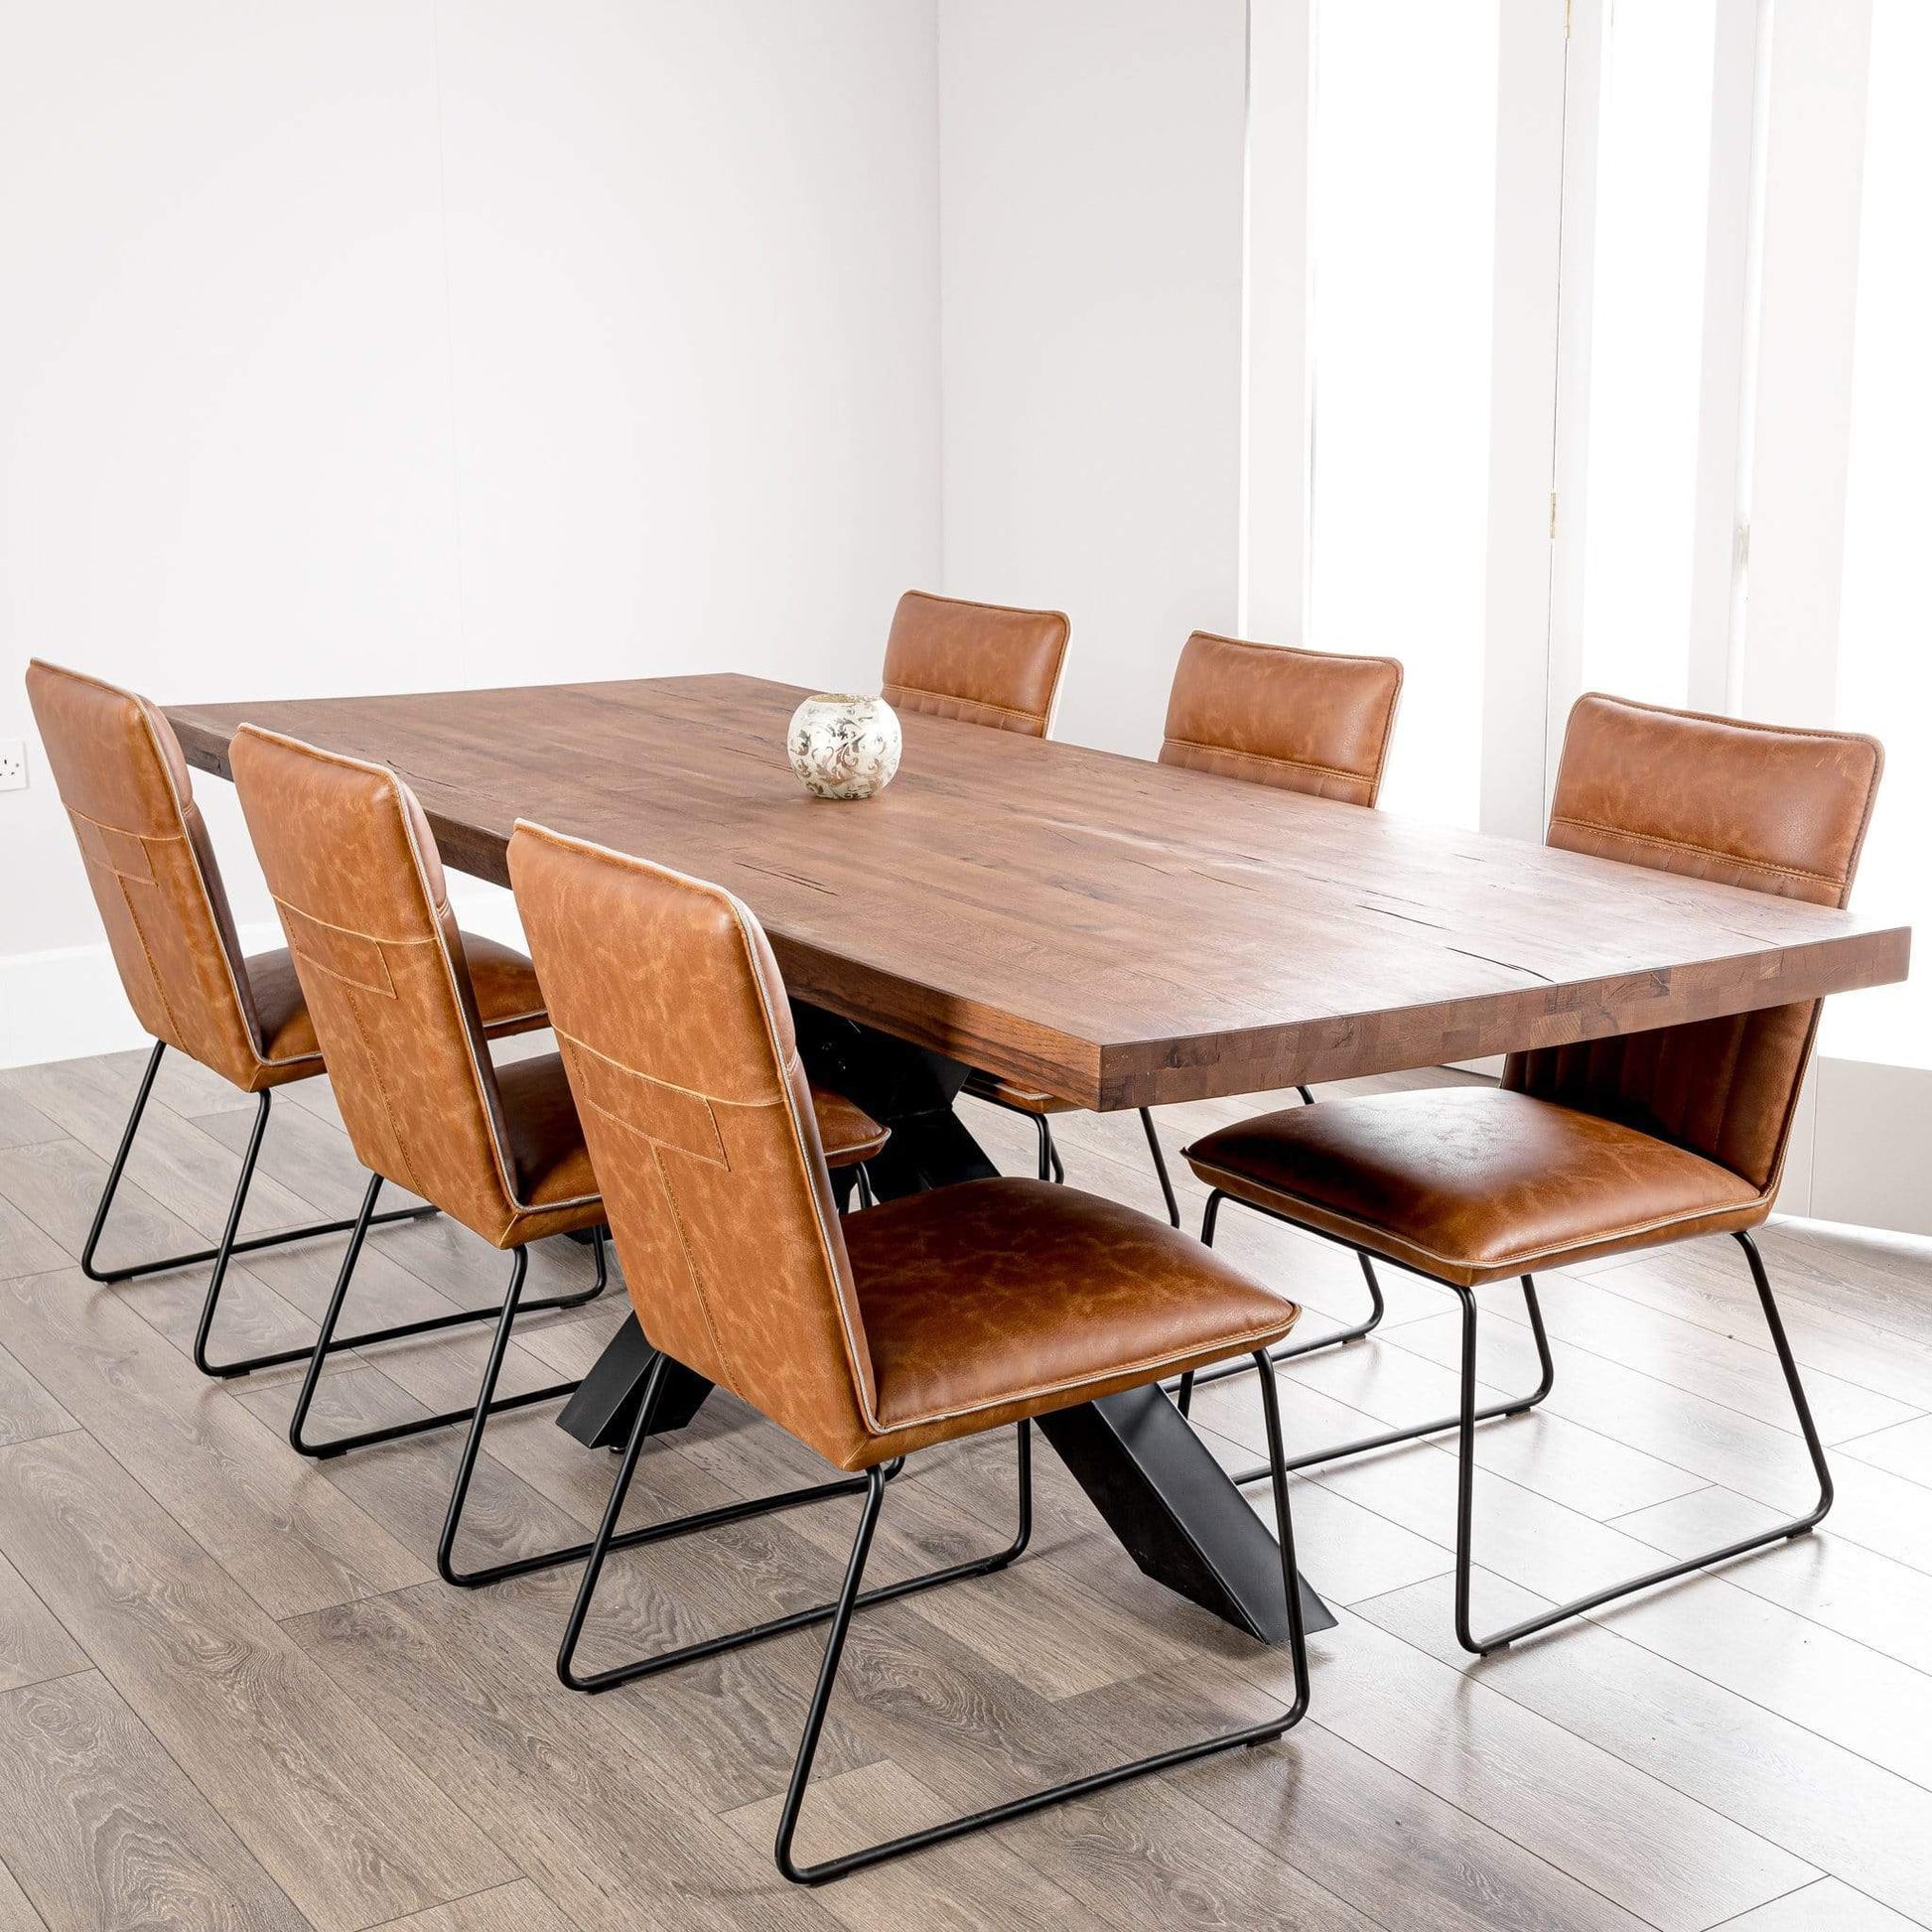 Furniture  -  Harrow Dining Table And 6 Hooper Tan Chairs  -  50146249